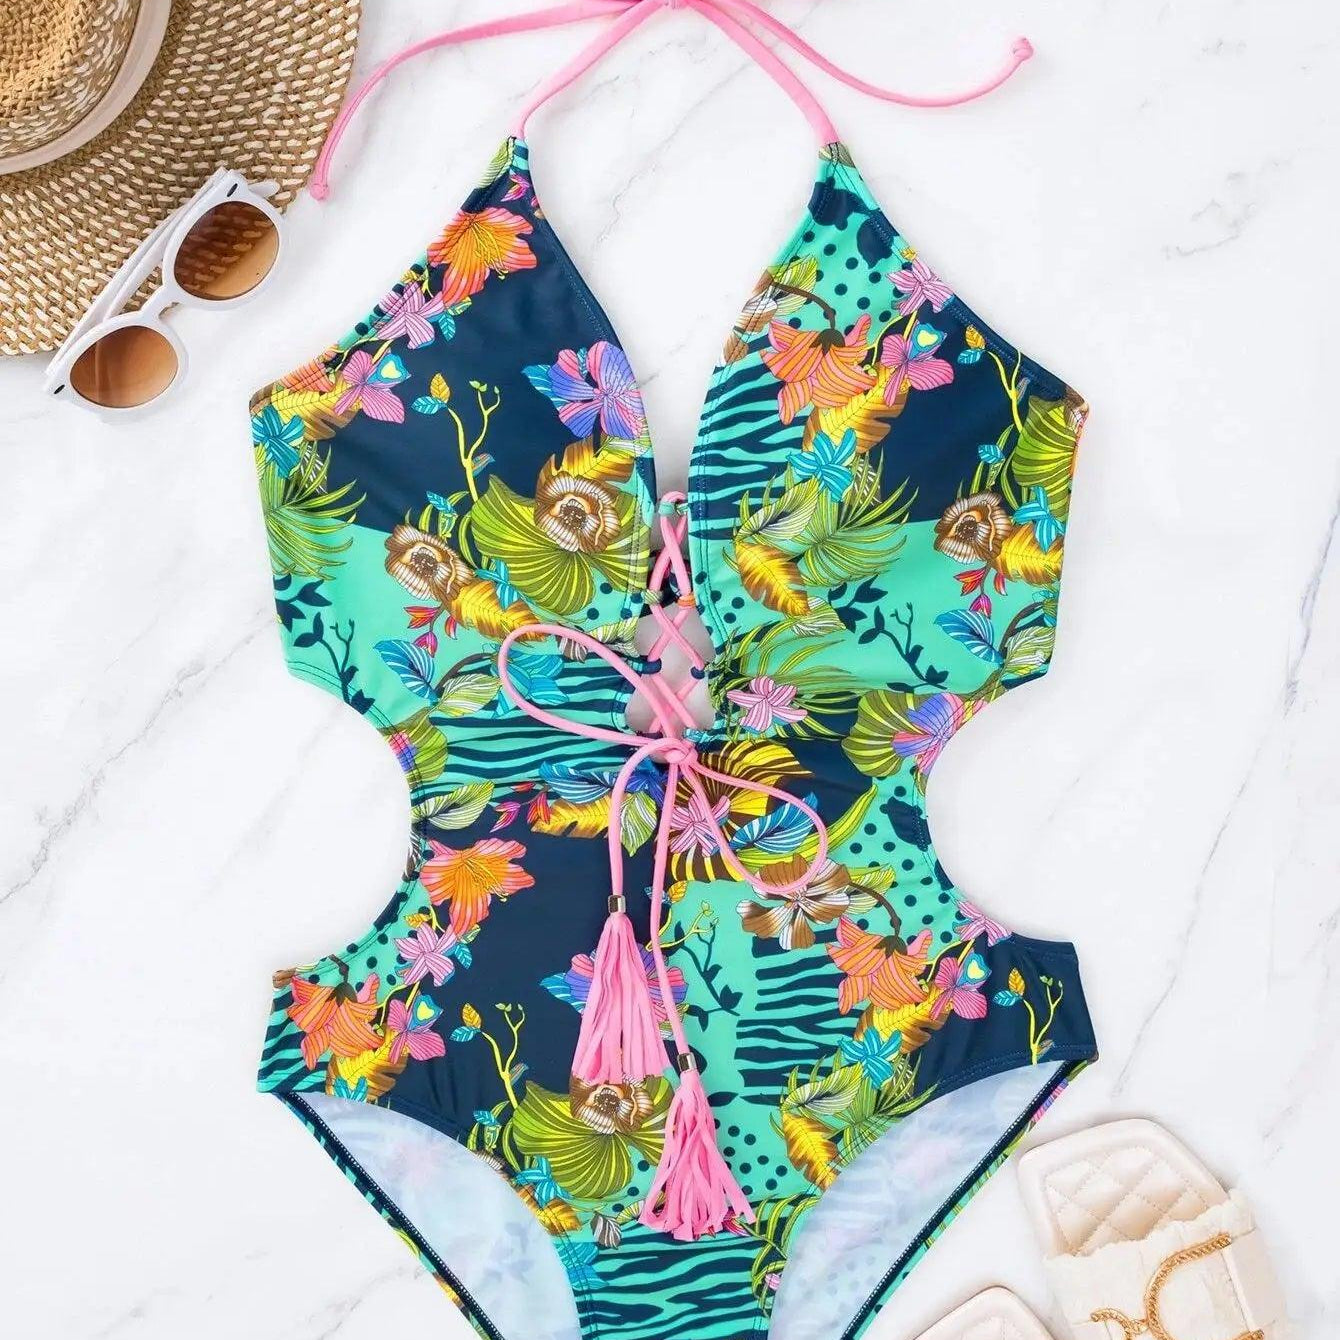 Women's Swimwear - 1PC Floral Print Lace Up Front One Piece Swimsuit